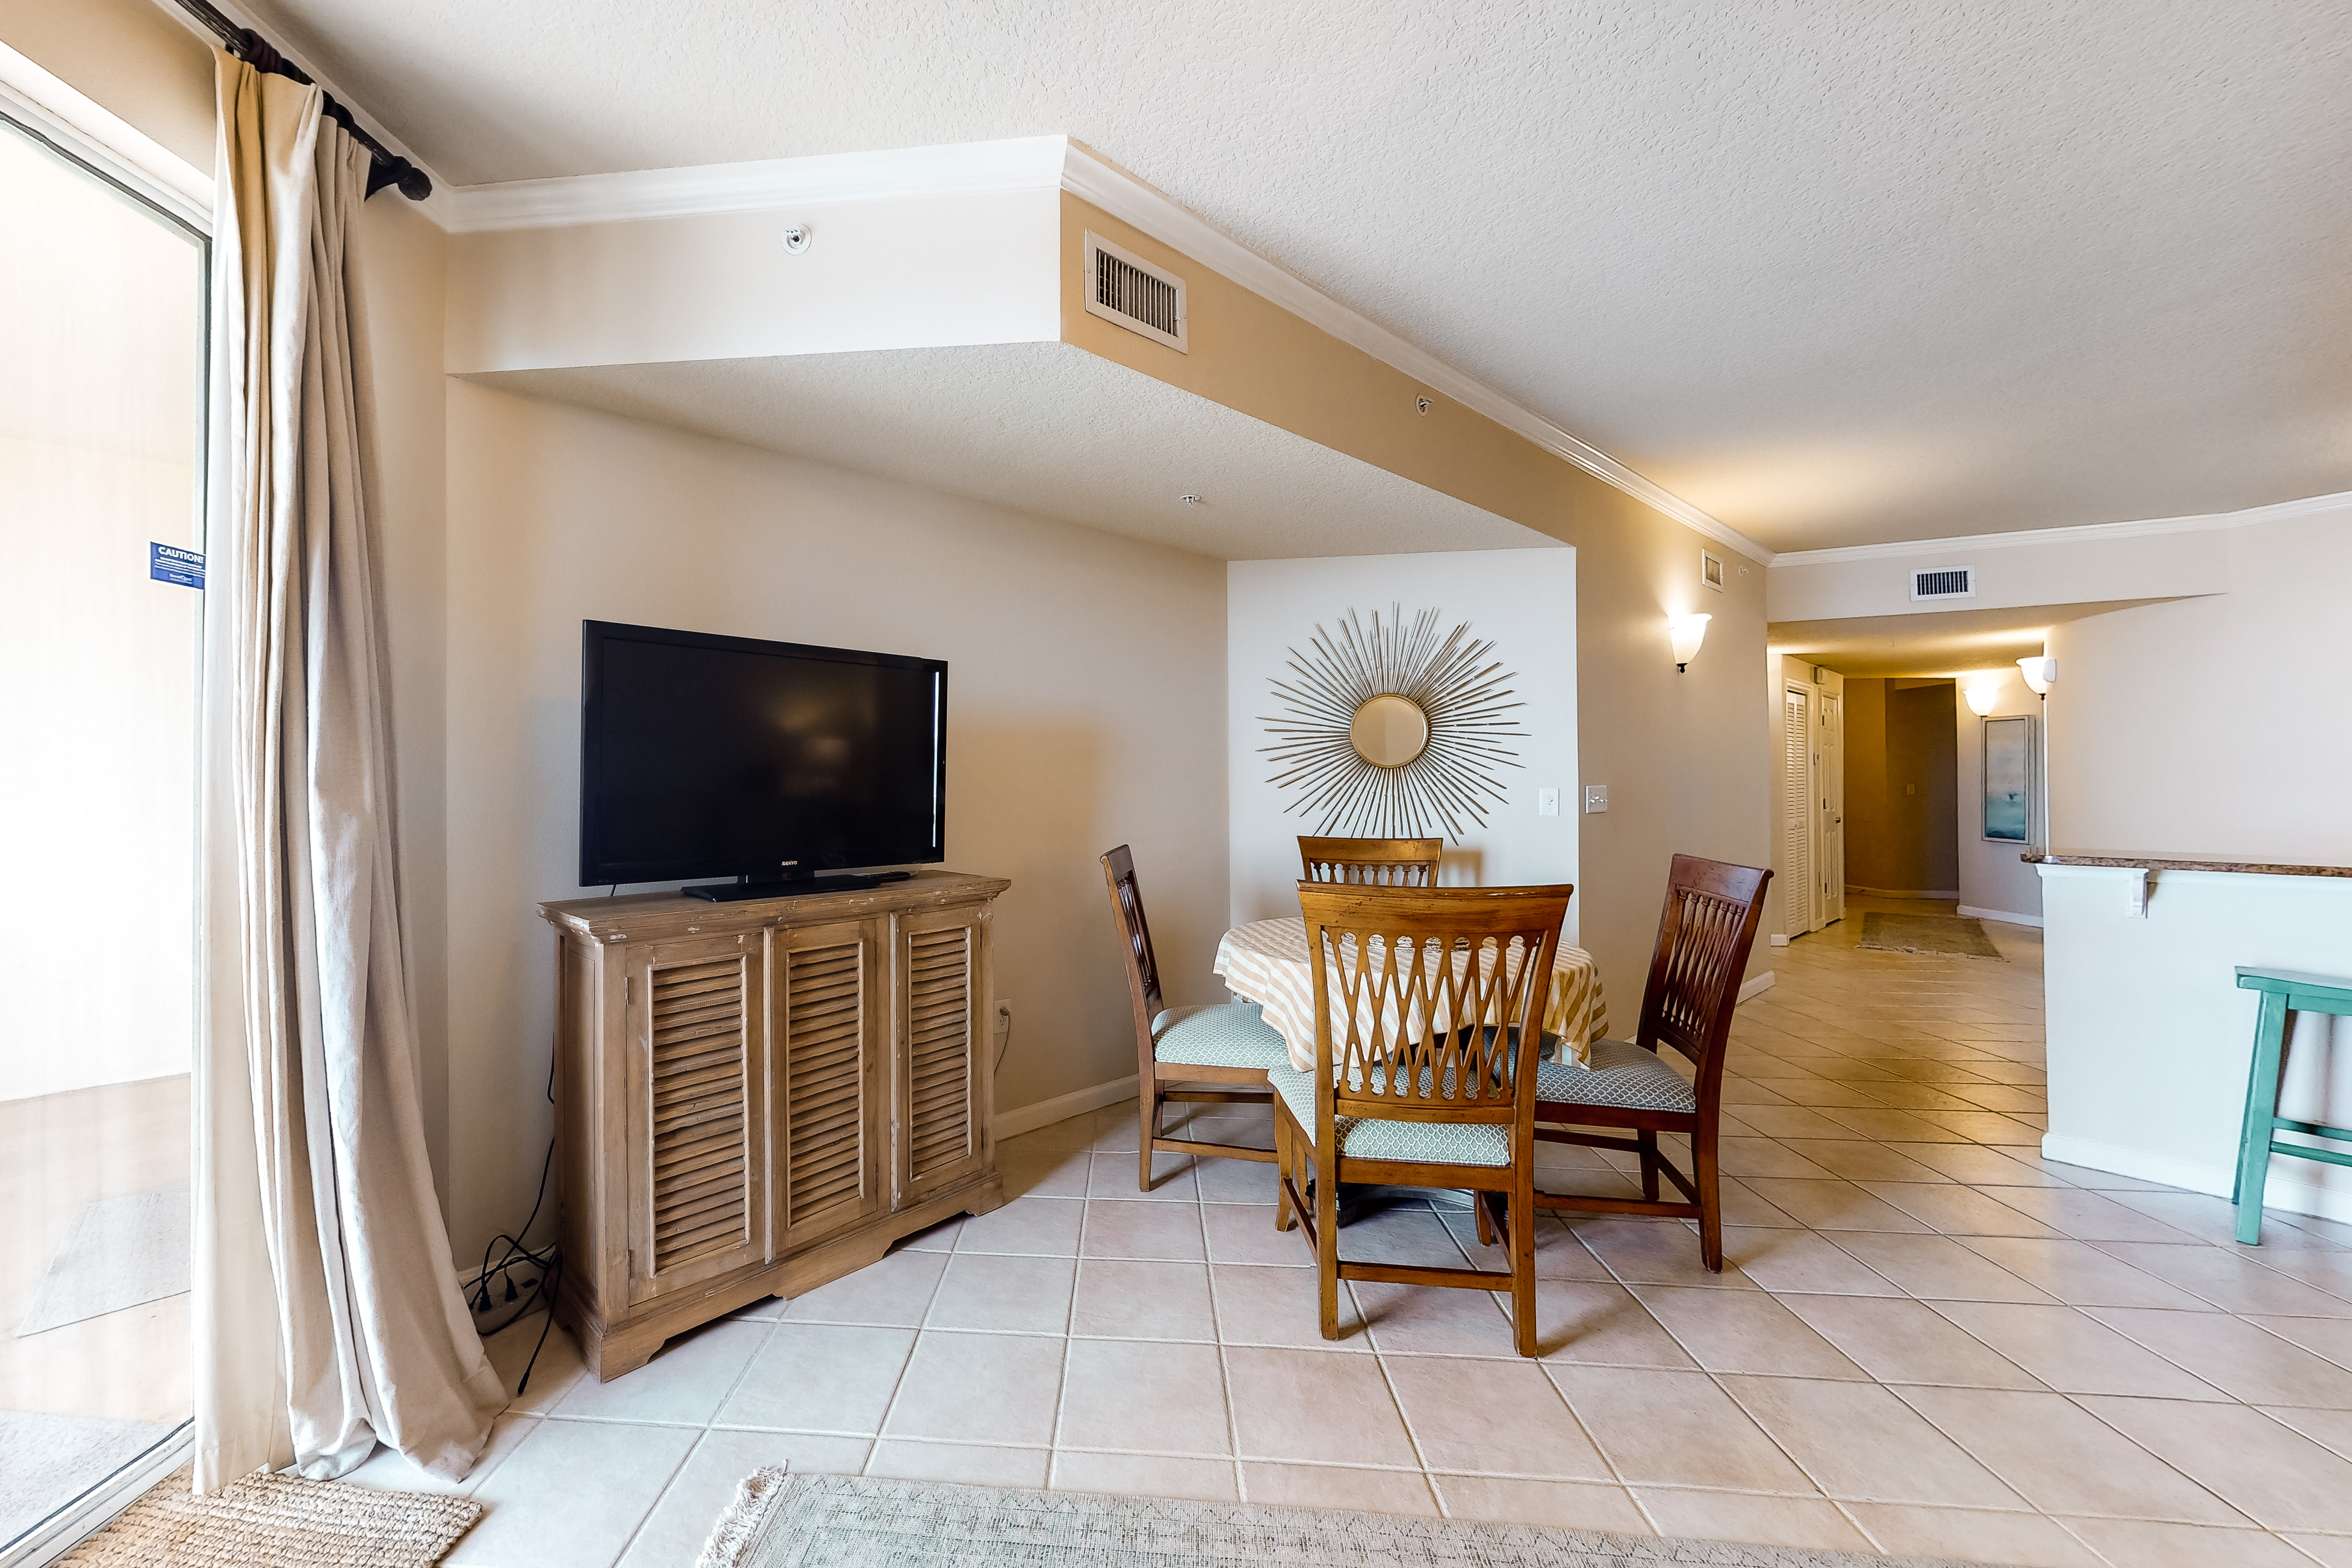 Dunes of Seagrove A303 Condo rental in Dunes of Seagrove in Highway 30-A Florida - #4